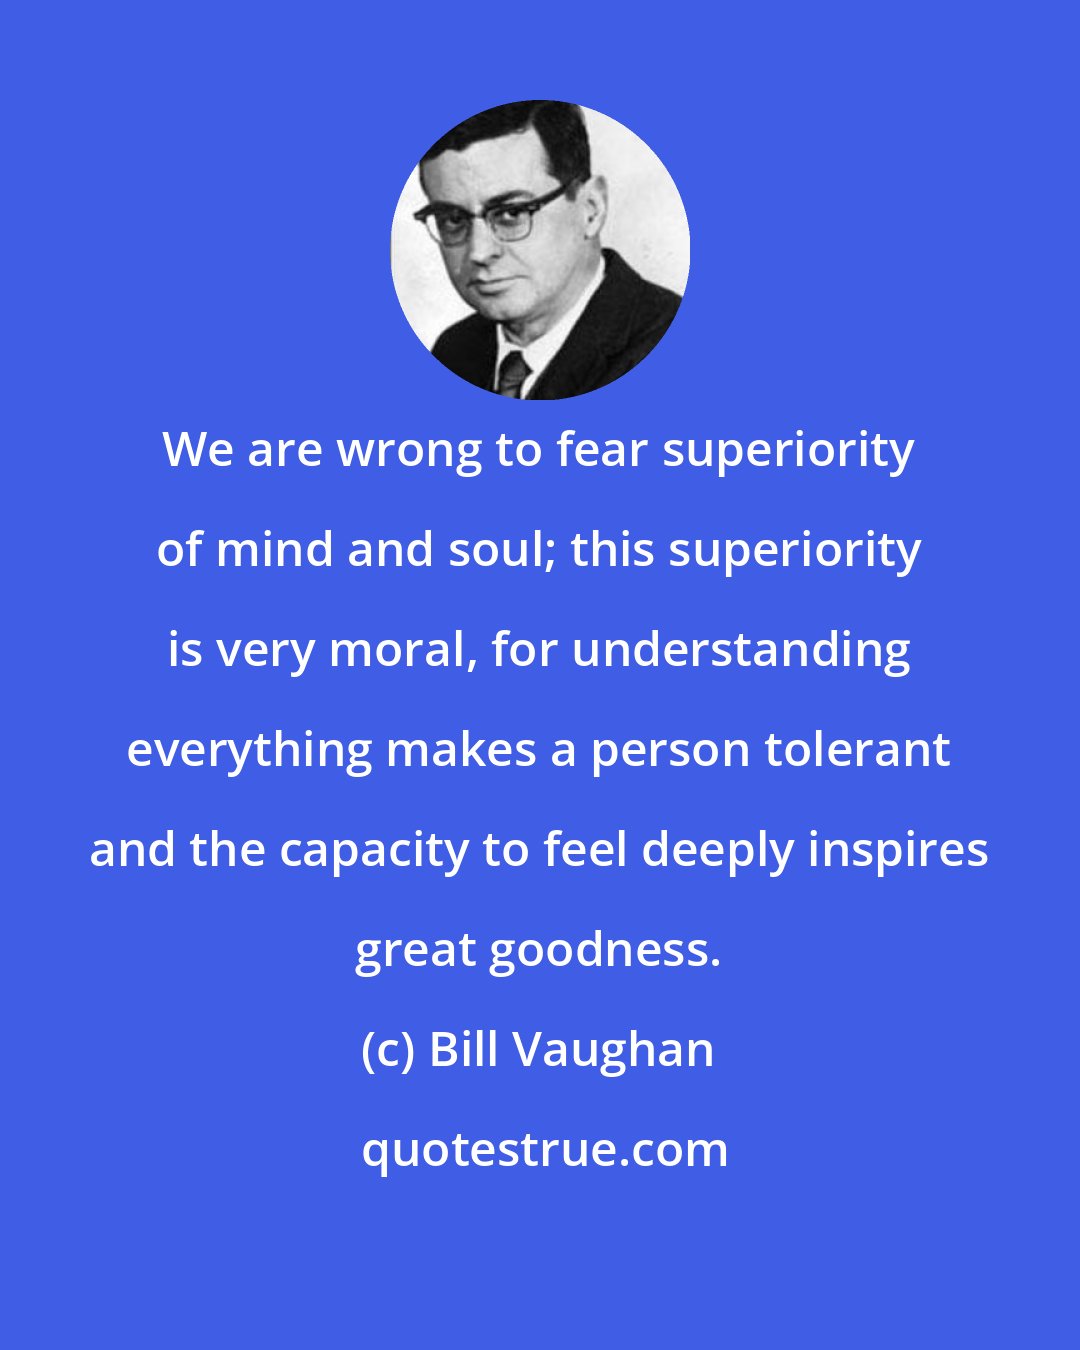 Bill Vaughan: We are wrong to fear superiority of mind and soul; this superiority is very moral, for understanding everything makes a person tolerant and the capacity to feel deeply inspires great goodness.